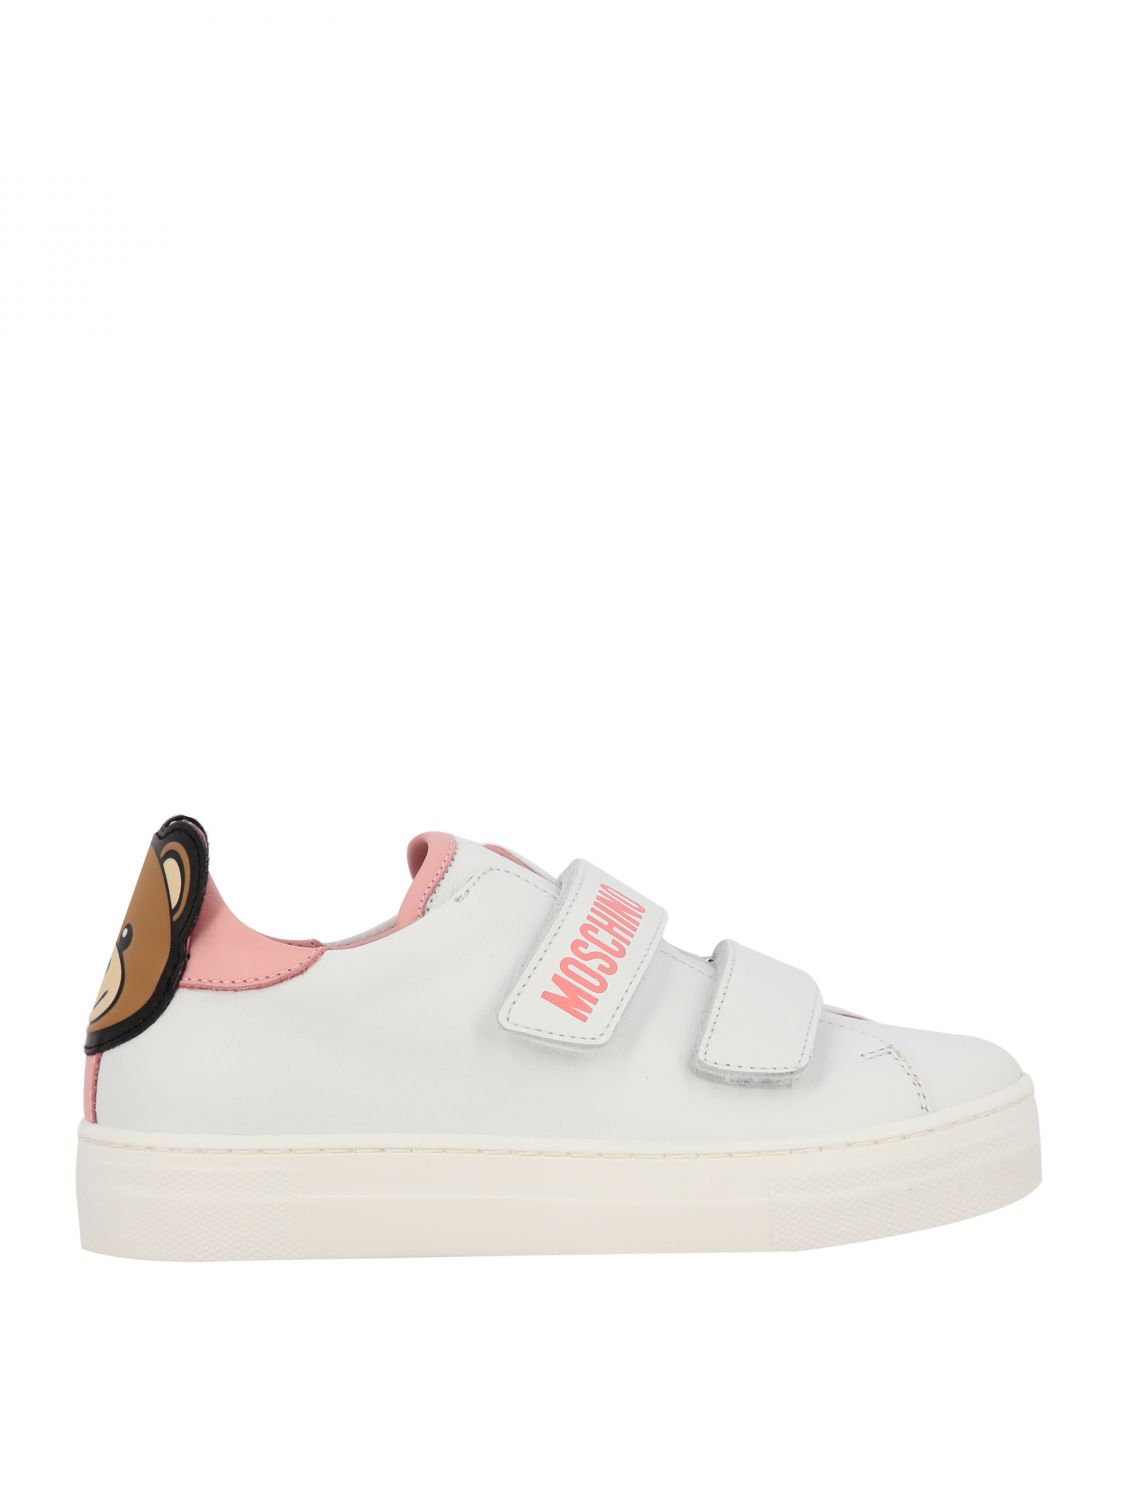 Moschino Teen Outlet: leather sneakers with teddy heel | Shoes Moschino ...